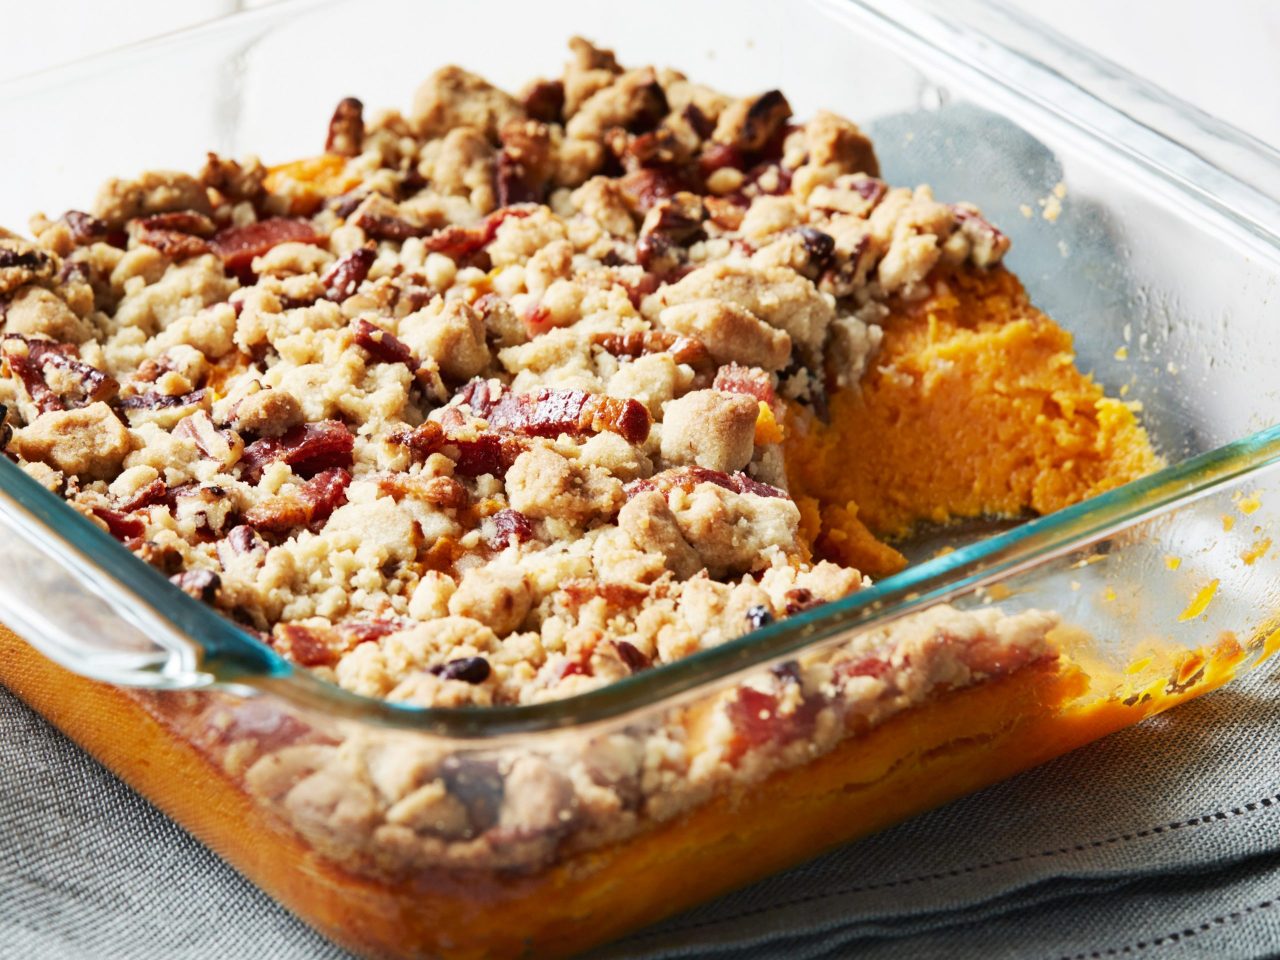 Food Network Kitchen's Sweet Potato Casserole with Bacon Crumble